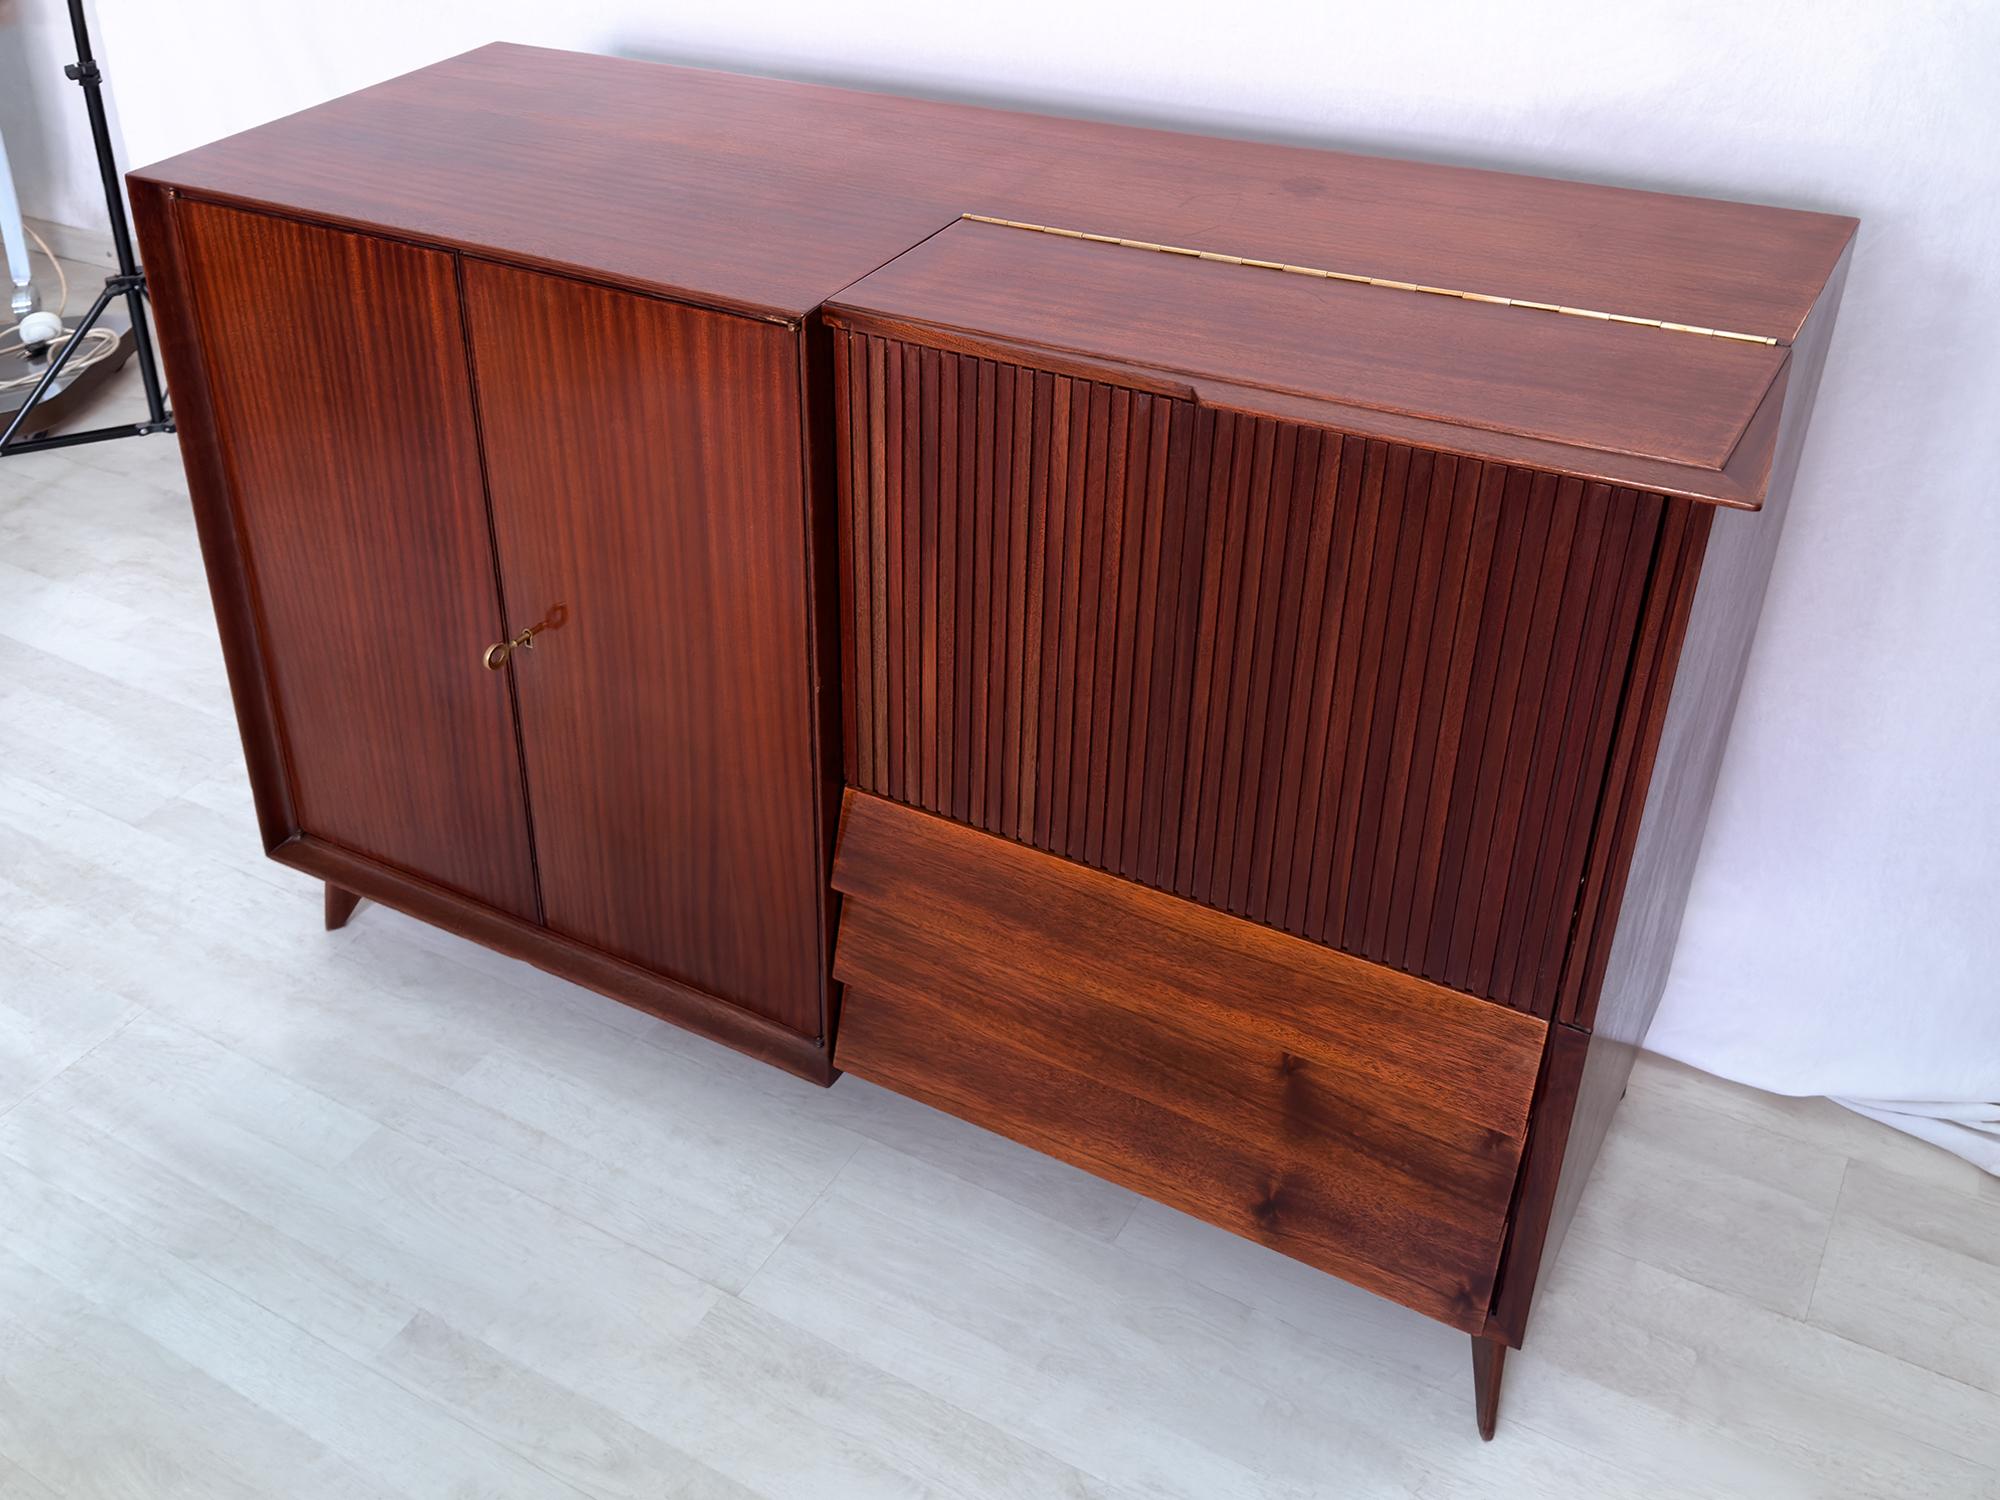 Italian Mid-Century Teak Wood Sideboard with Bar Cabinet by Vittorio Dassi, 1950s For Sale 2